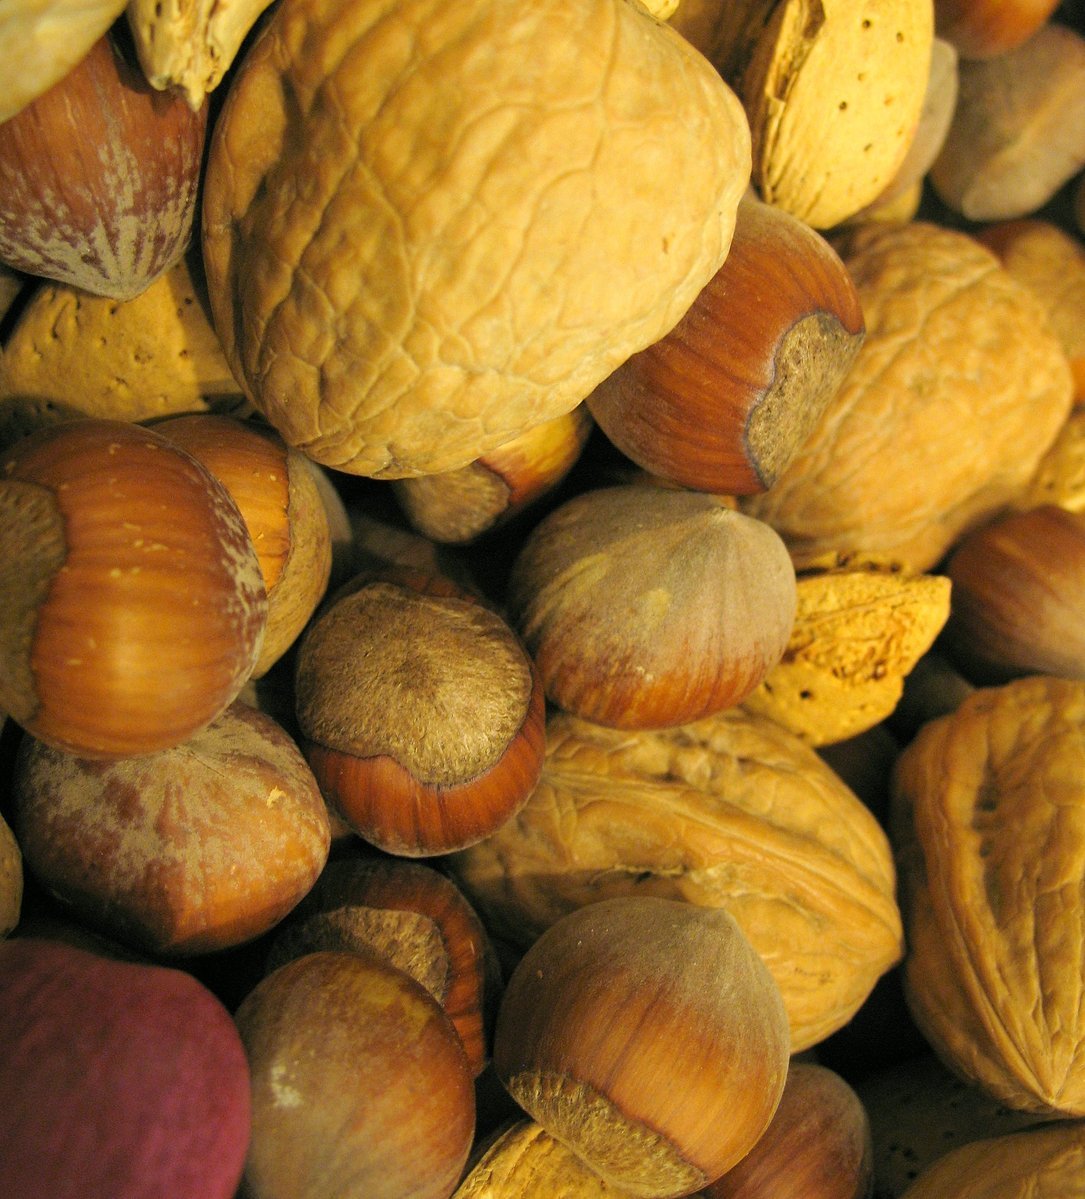 Several different types of brown nuts.